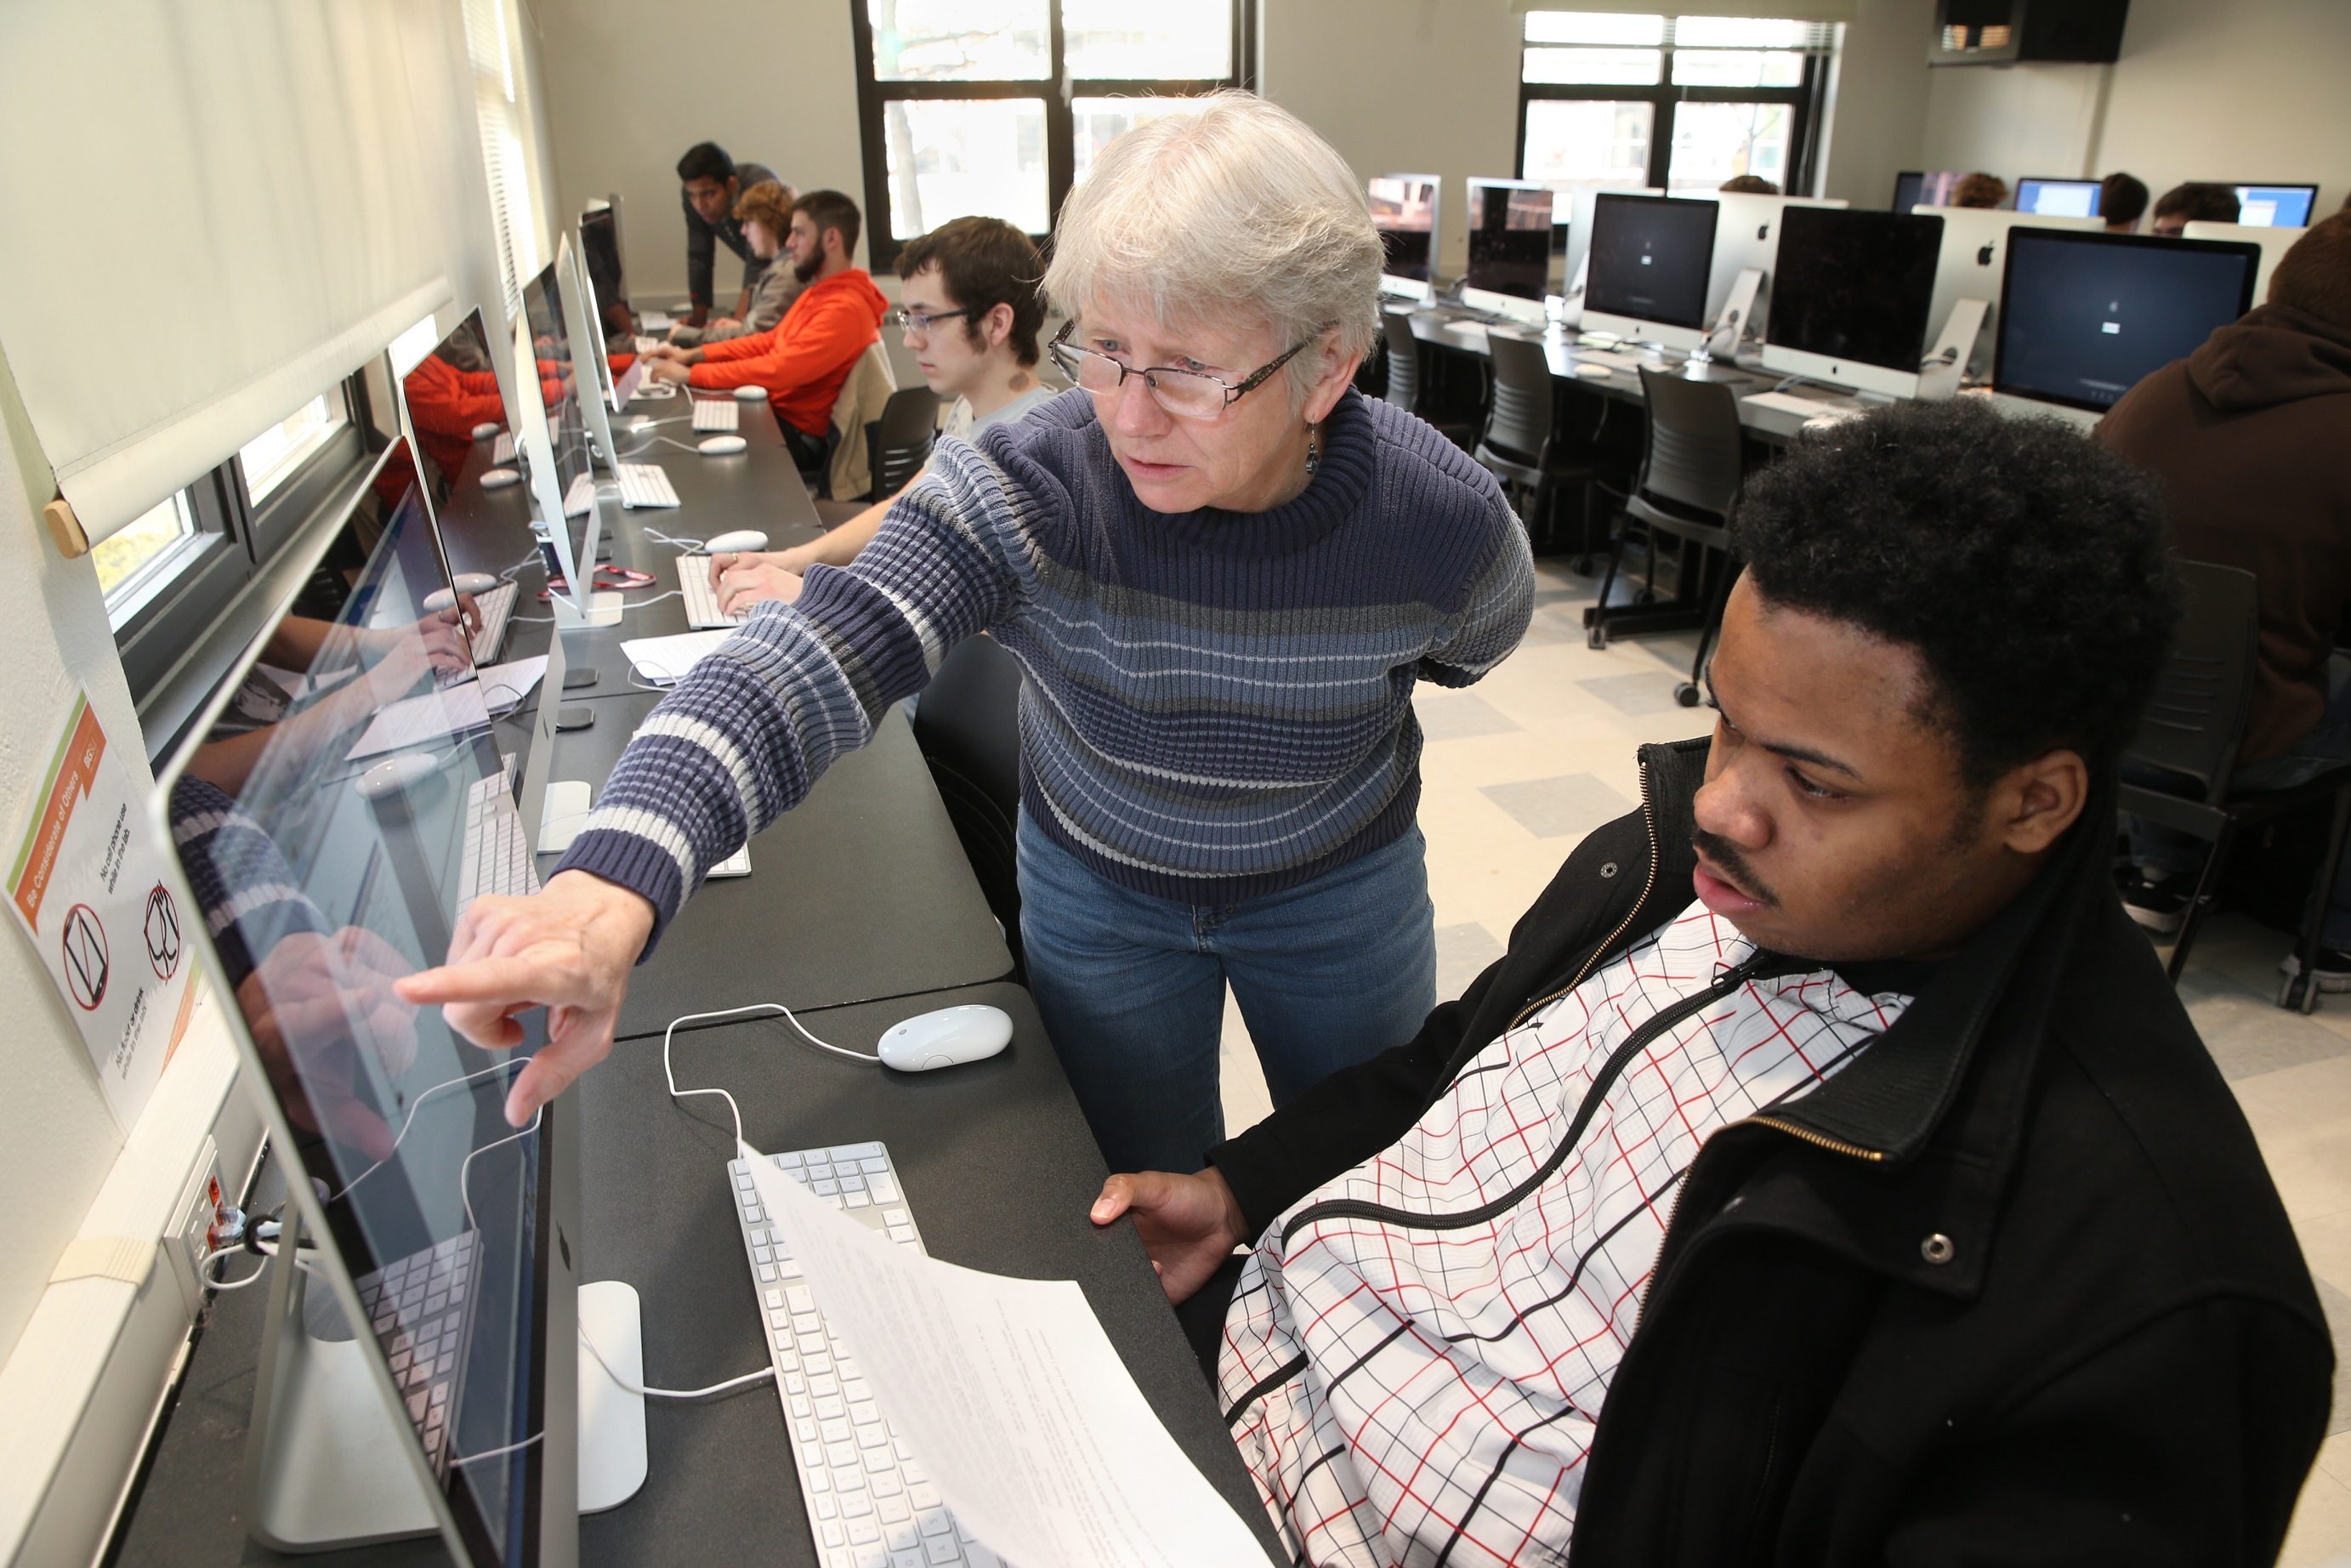 Bachelor of Arts students have access to several computer labs on our Ohio campus.